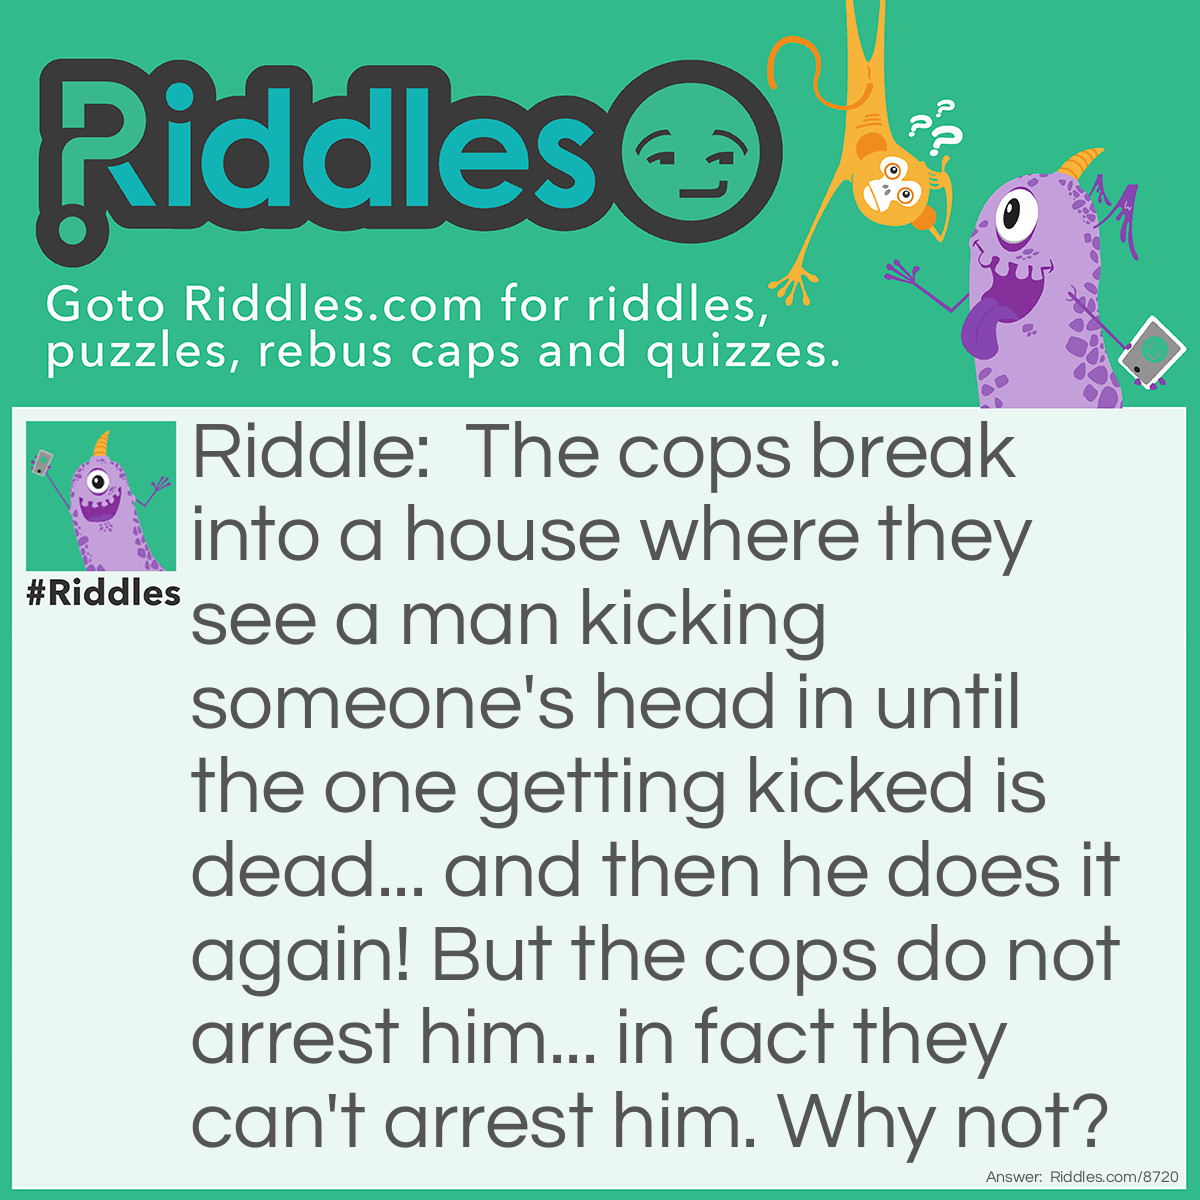 Riddle: The cops break into a house where they see a man kicking someone's head in until the one getting kicked is dead... and then he does it again! But the cops do not arrest him... in fact they can't arrest him. Why not? Answer: Because the man is Mario and he is a videogame!